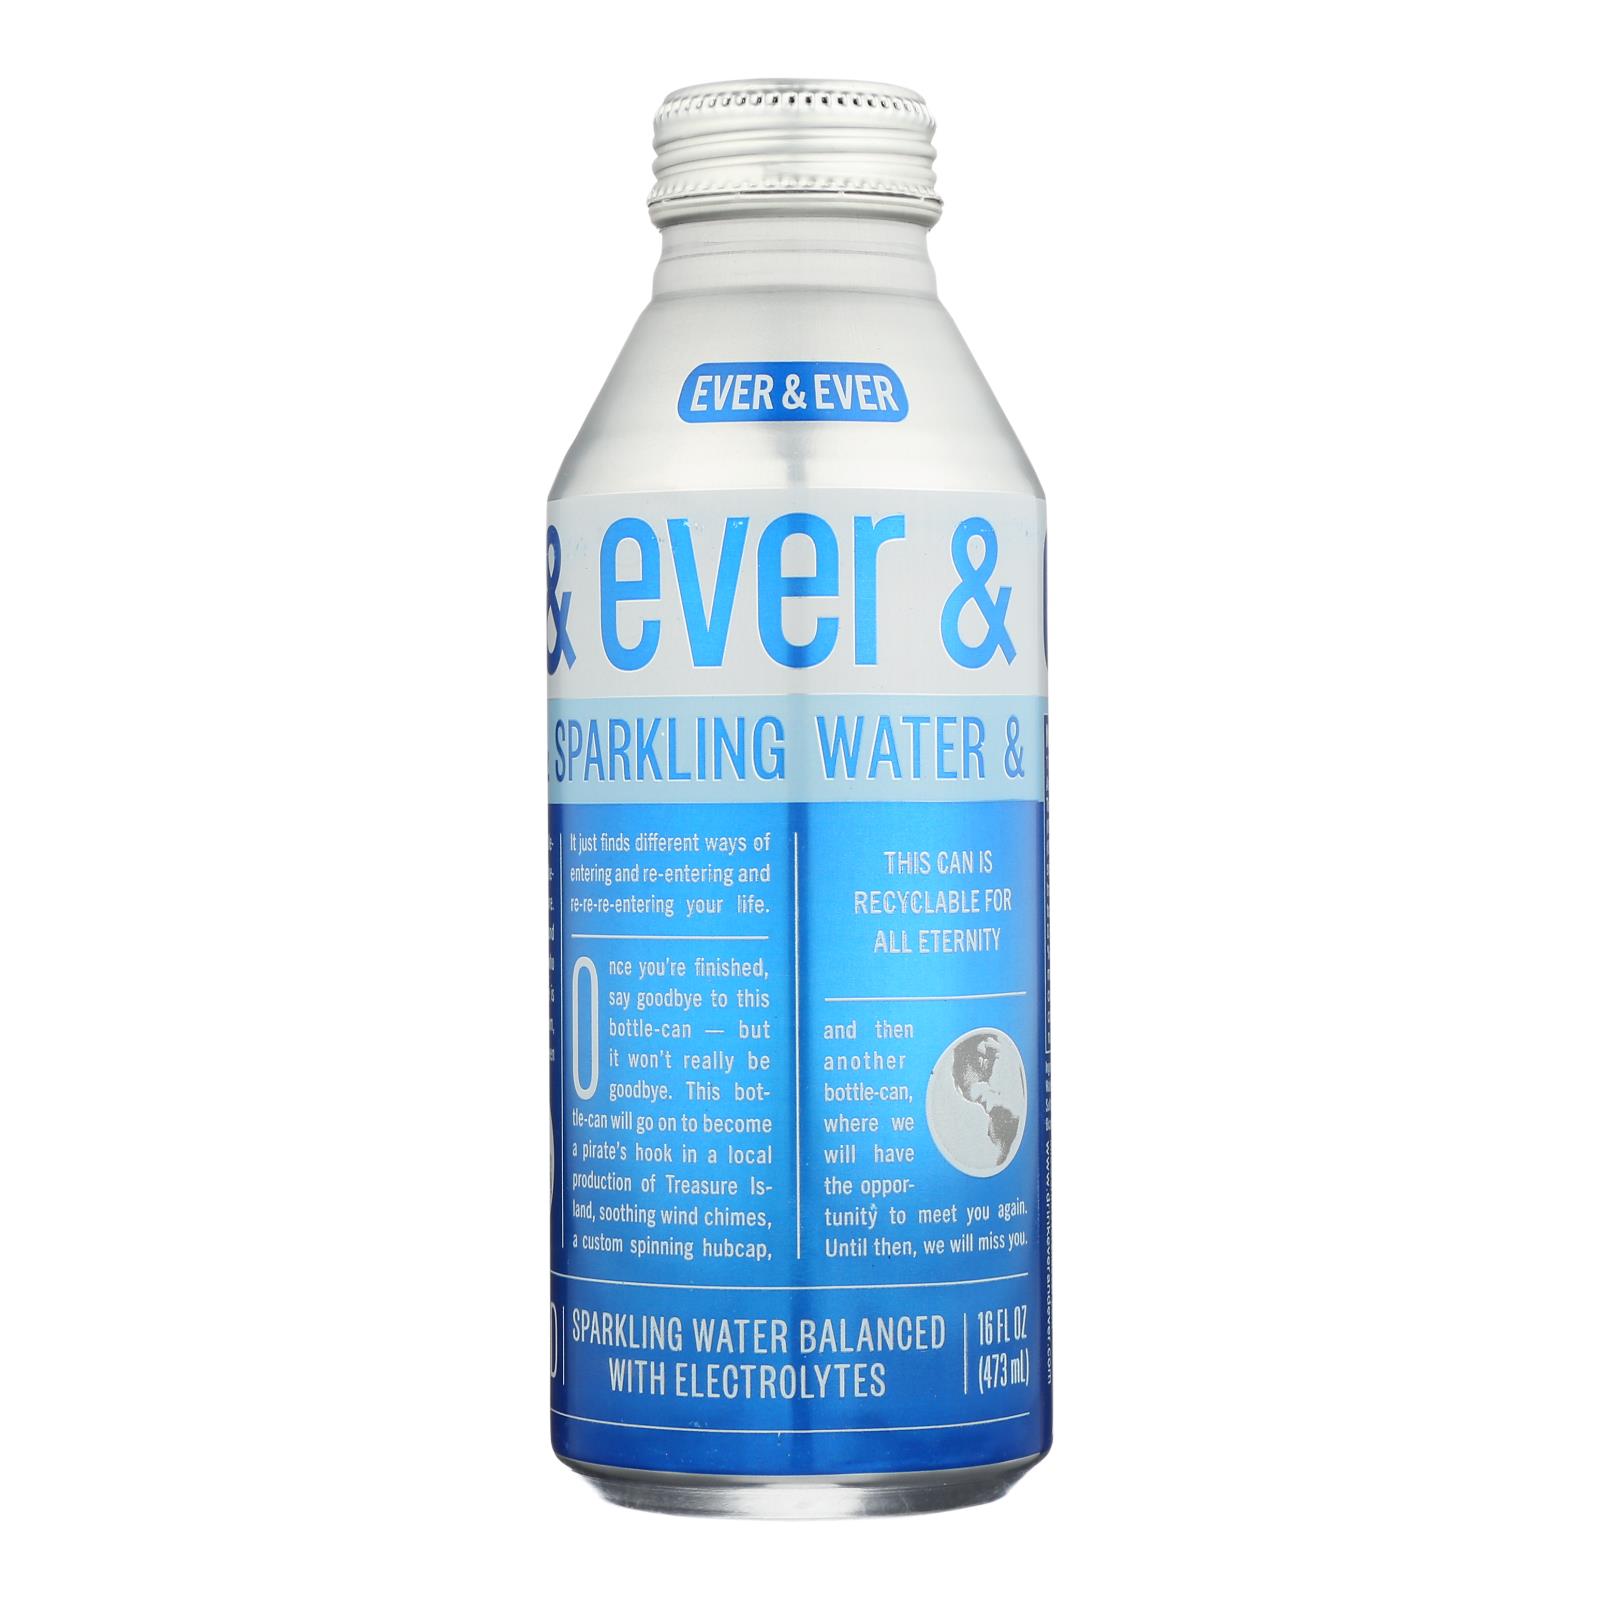 Ever & Ever - Water Sparkling - 12개 묶음상품 - 16 FZ